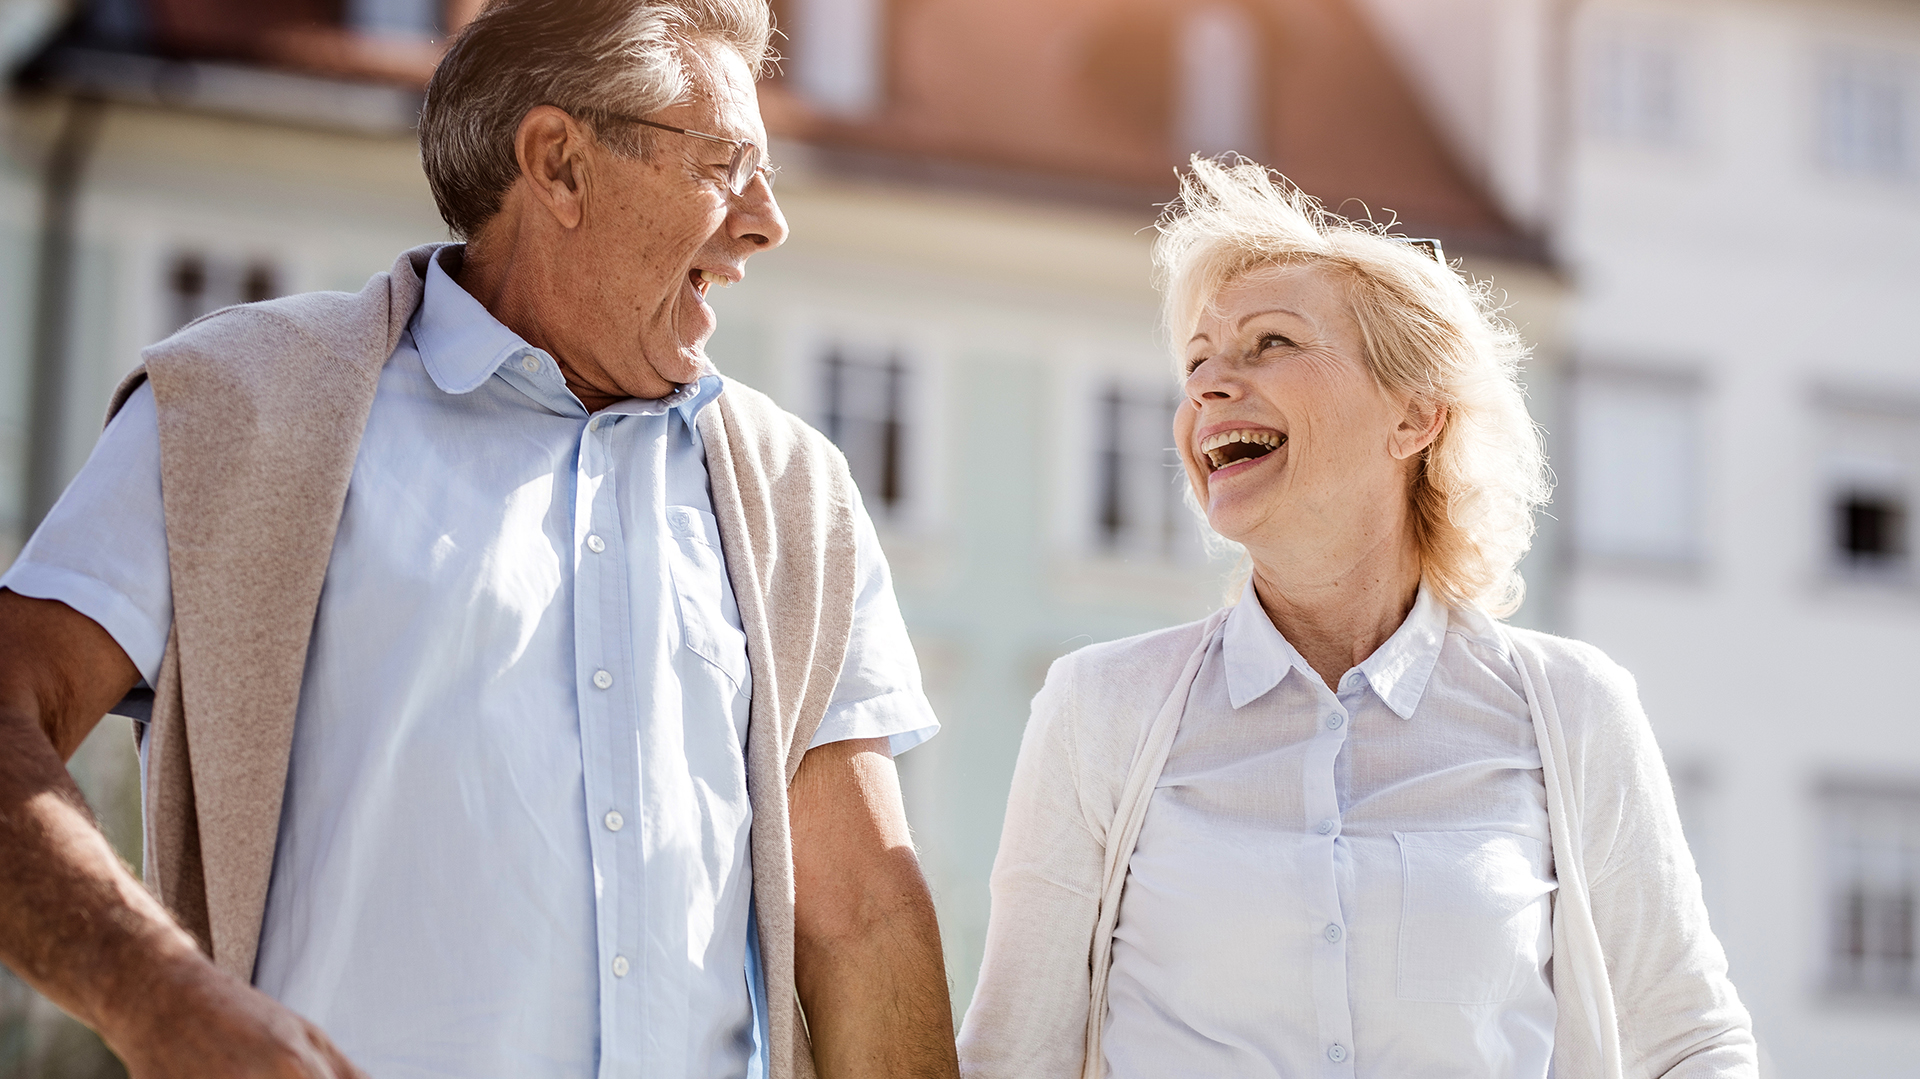 Benefits of Moving to Senior Independent Living | The Merion